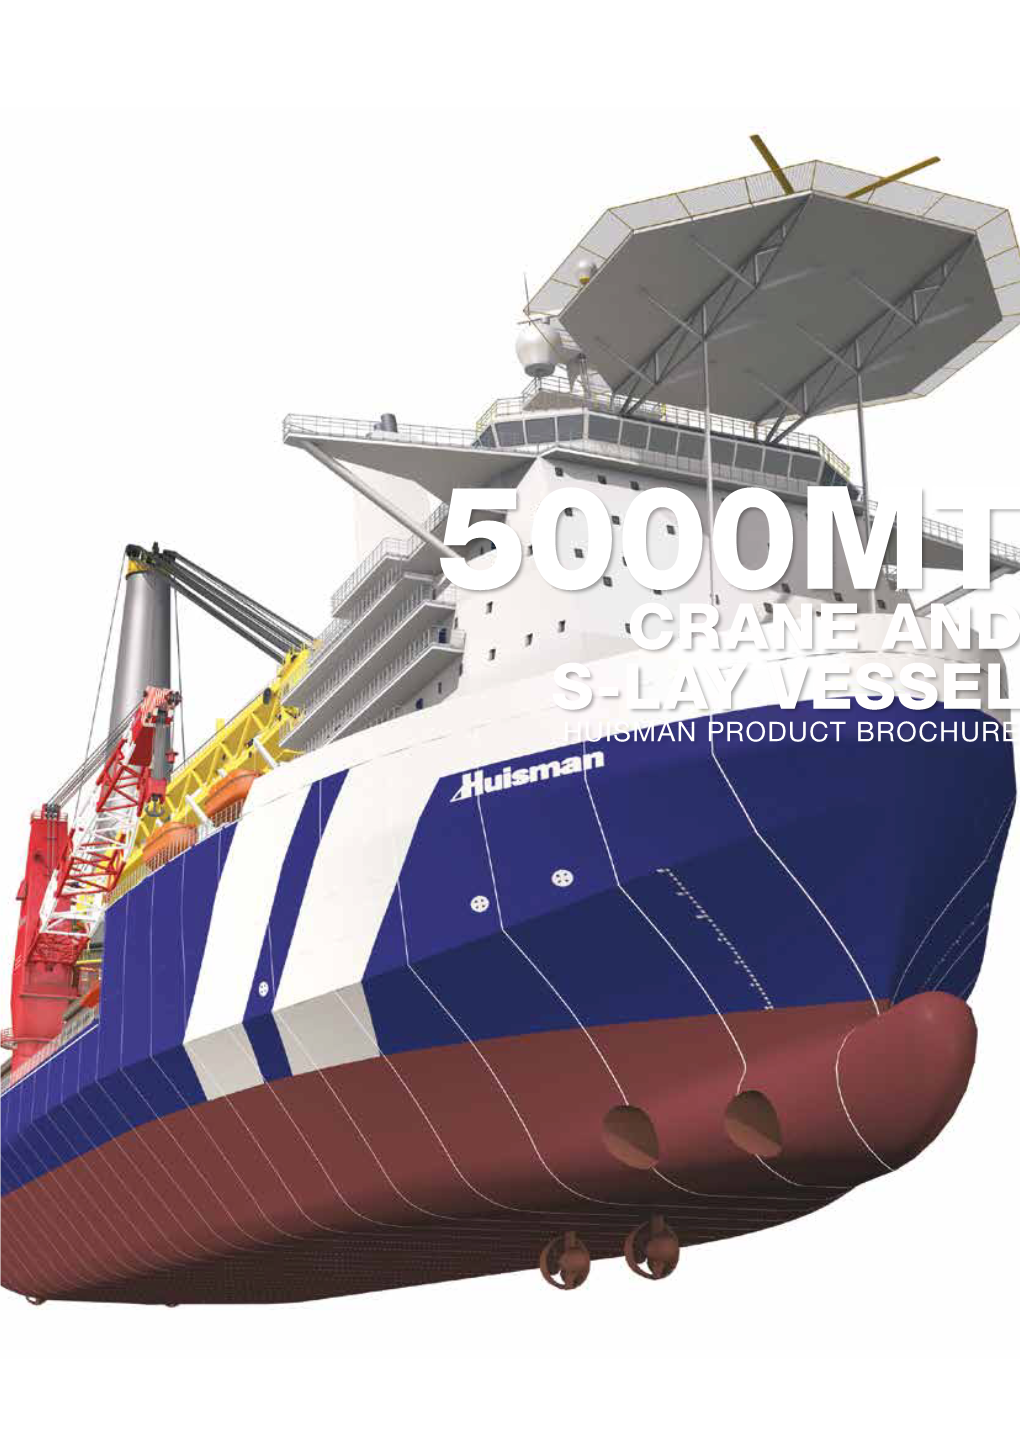 Crane and S-Lay Vessel Huisman Product Brochure 5000Mt Crane and S-Lay Vessel